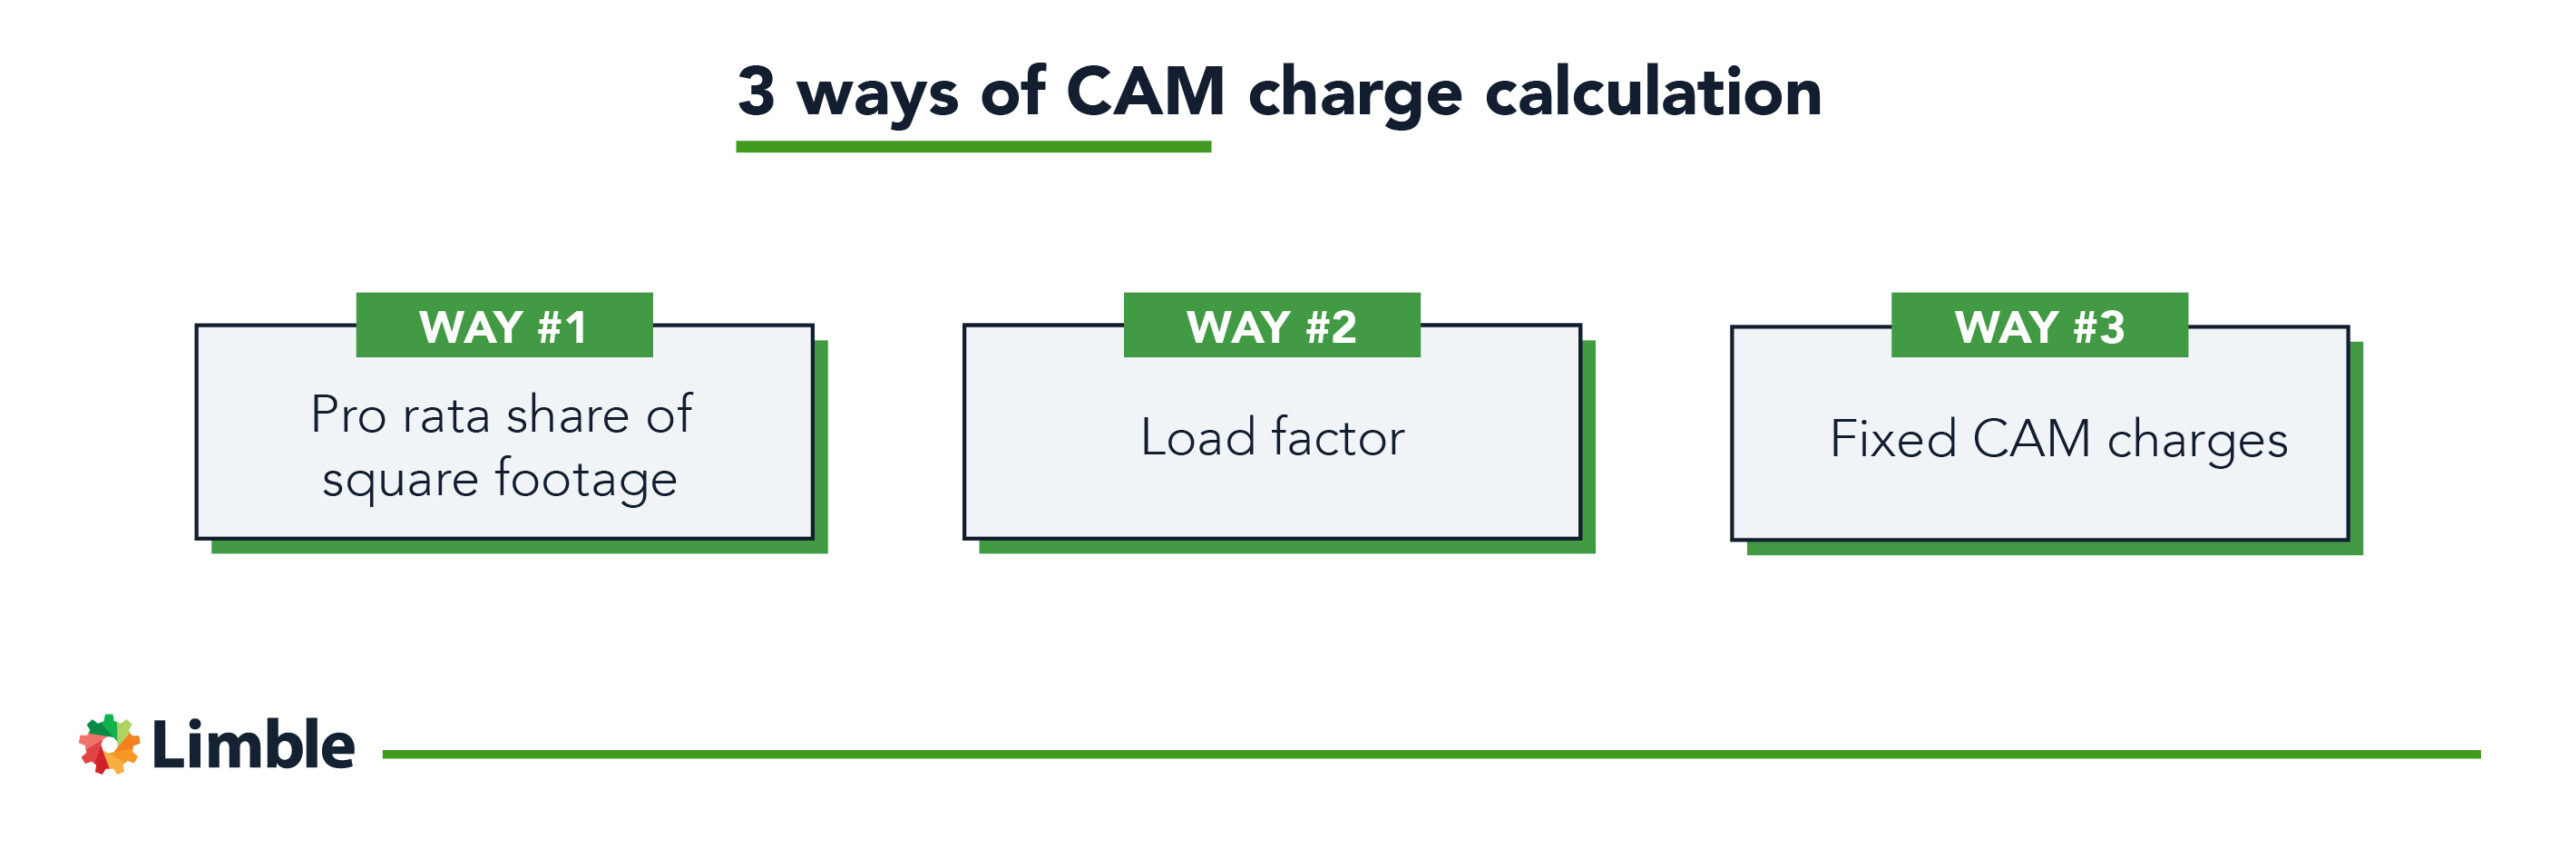 CAM charge calculation types